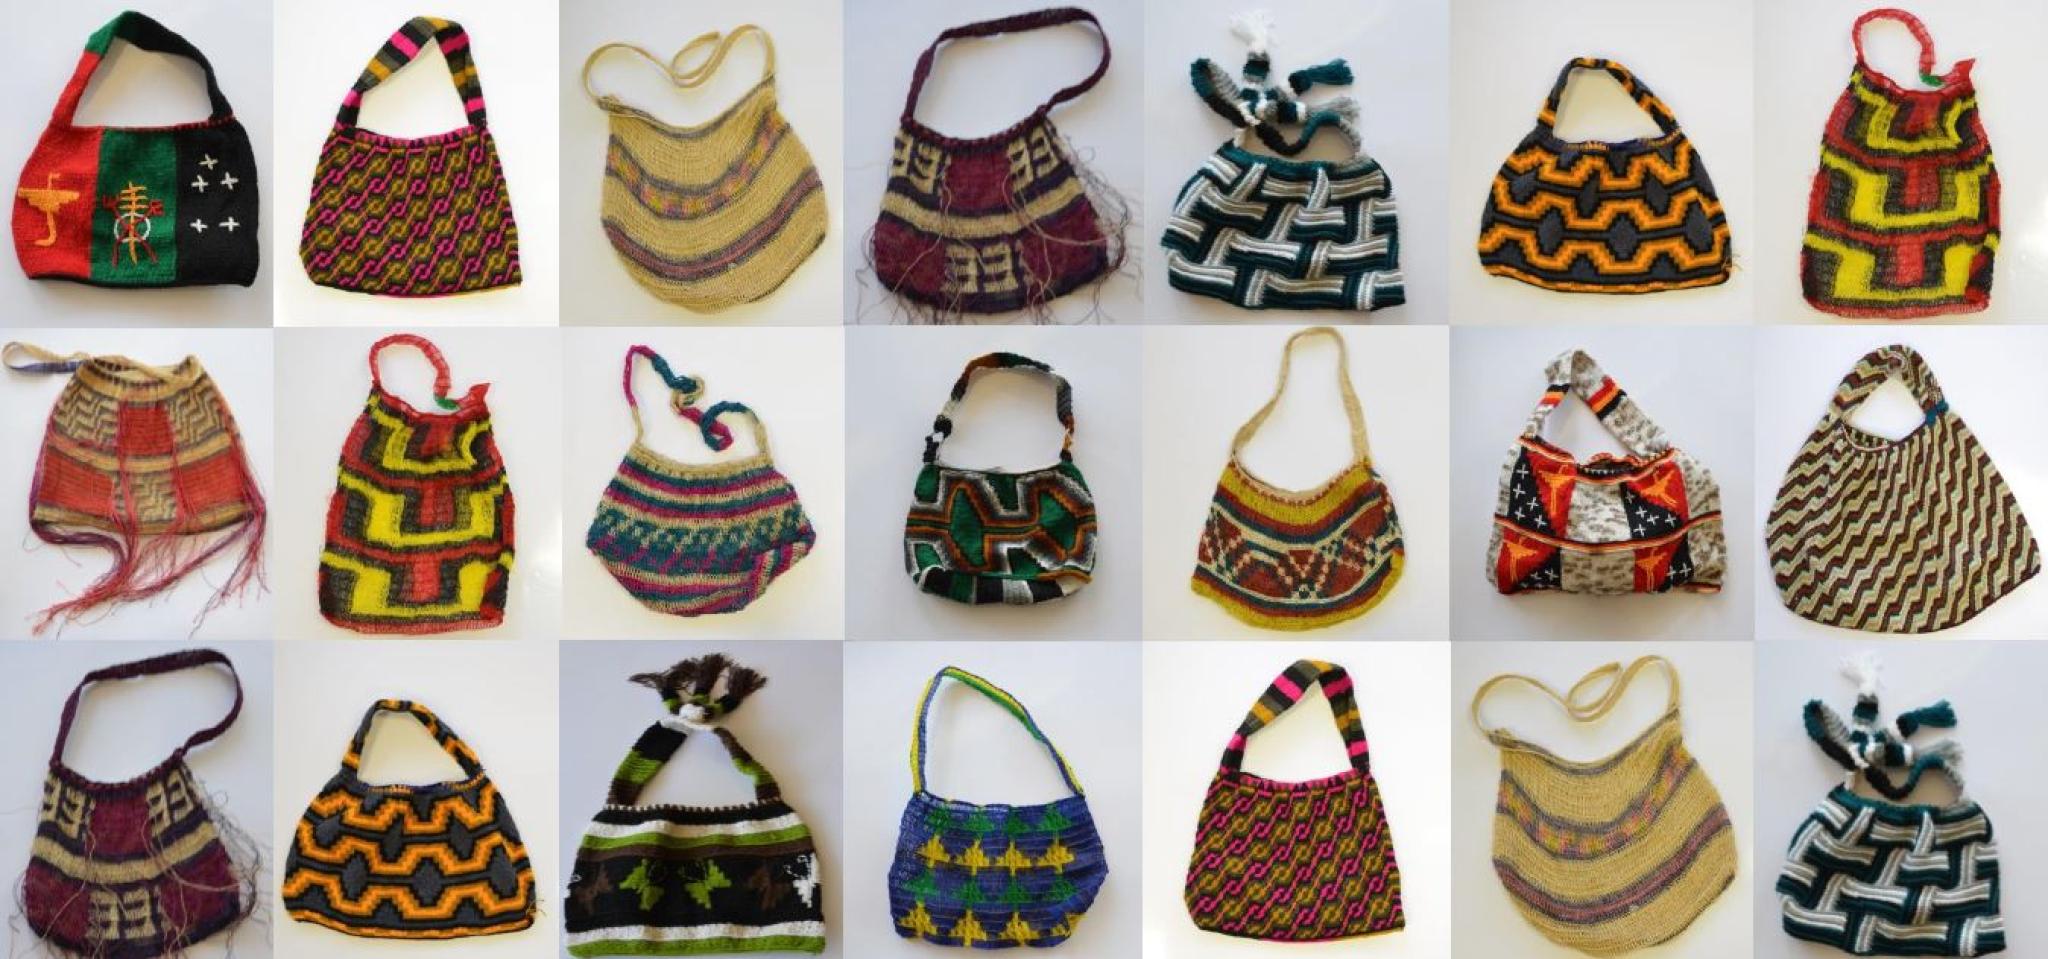 The bilum is a traditional PNG hand woven bag which incorporates a range of different weaves and patterns